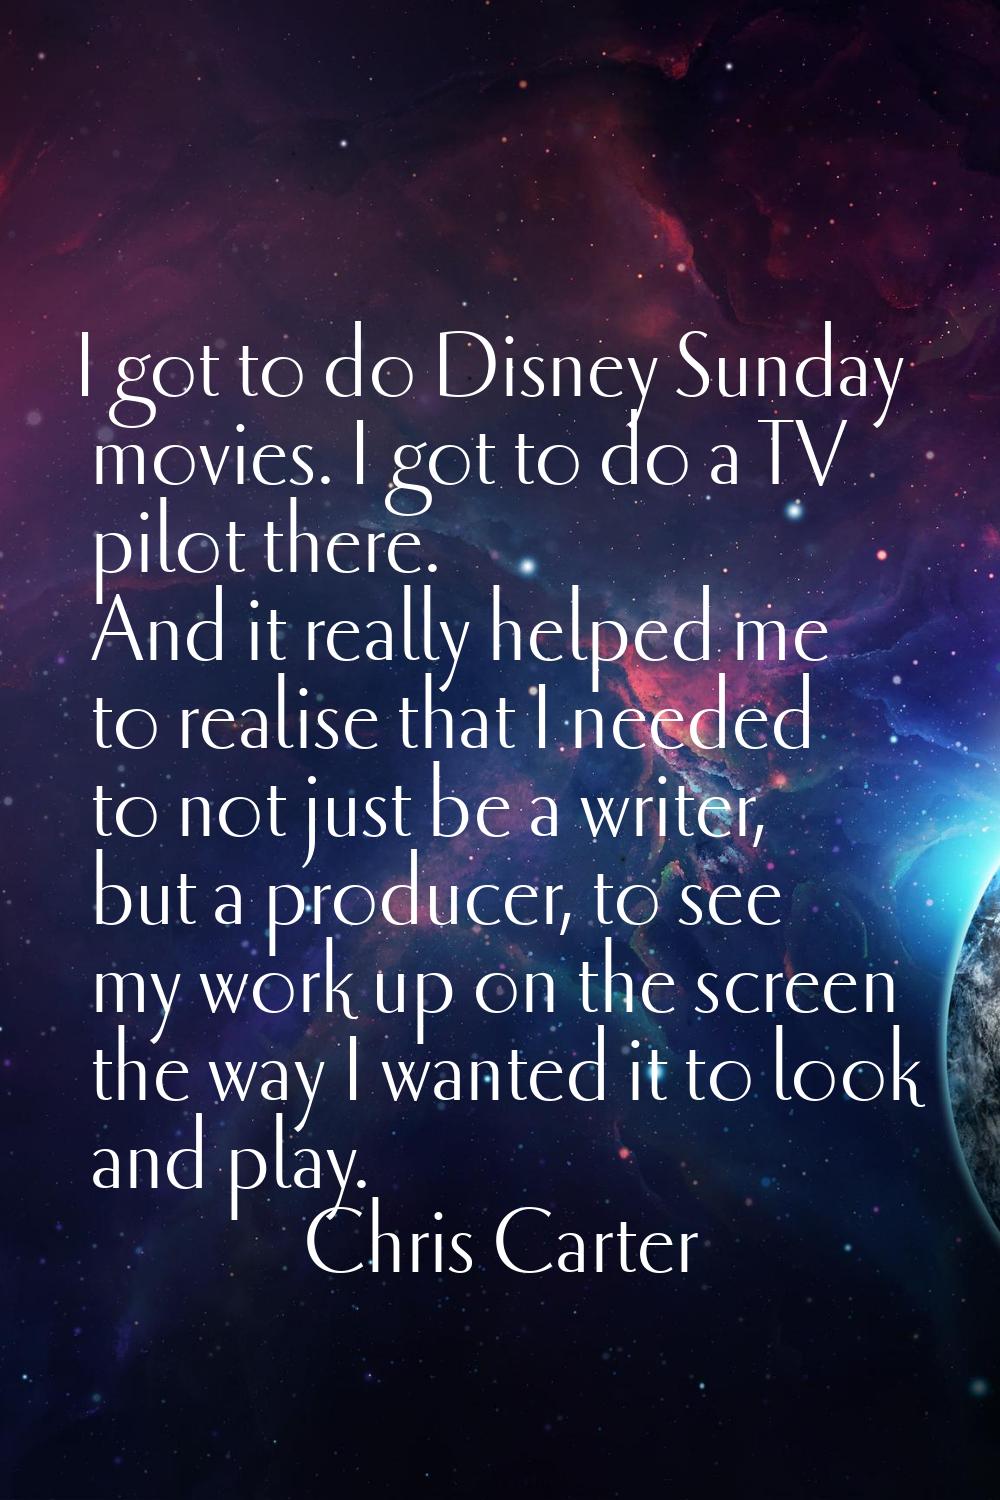 I got to do Disney Sunday movies. I got to do a TV pilot there. And it really helped me to realise 